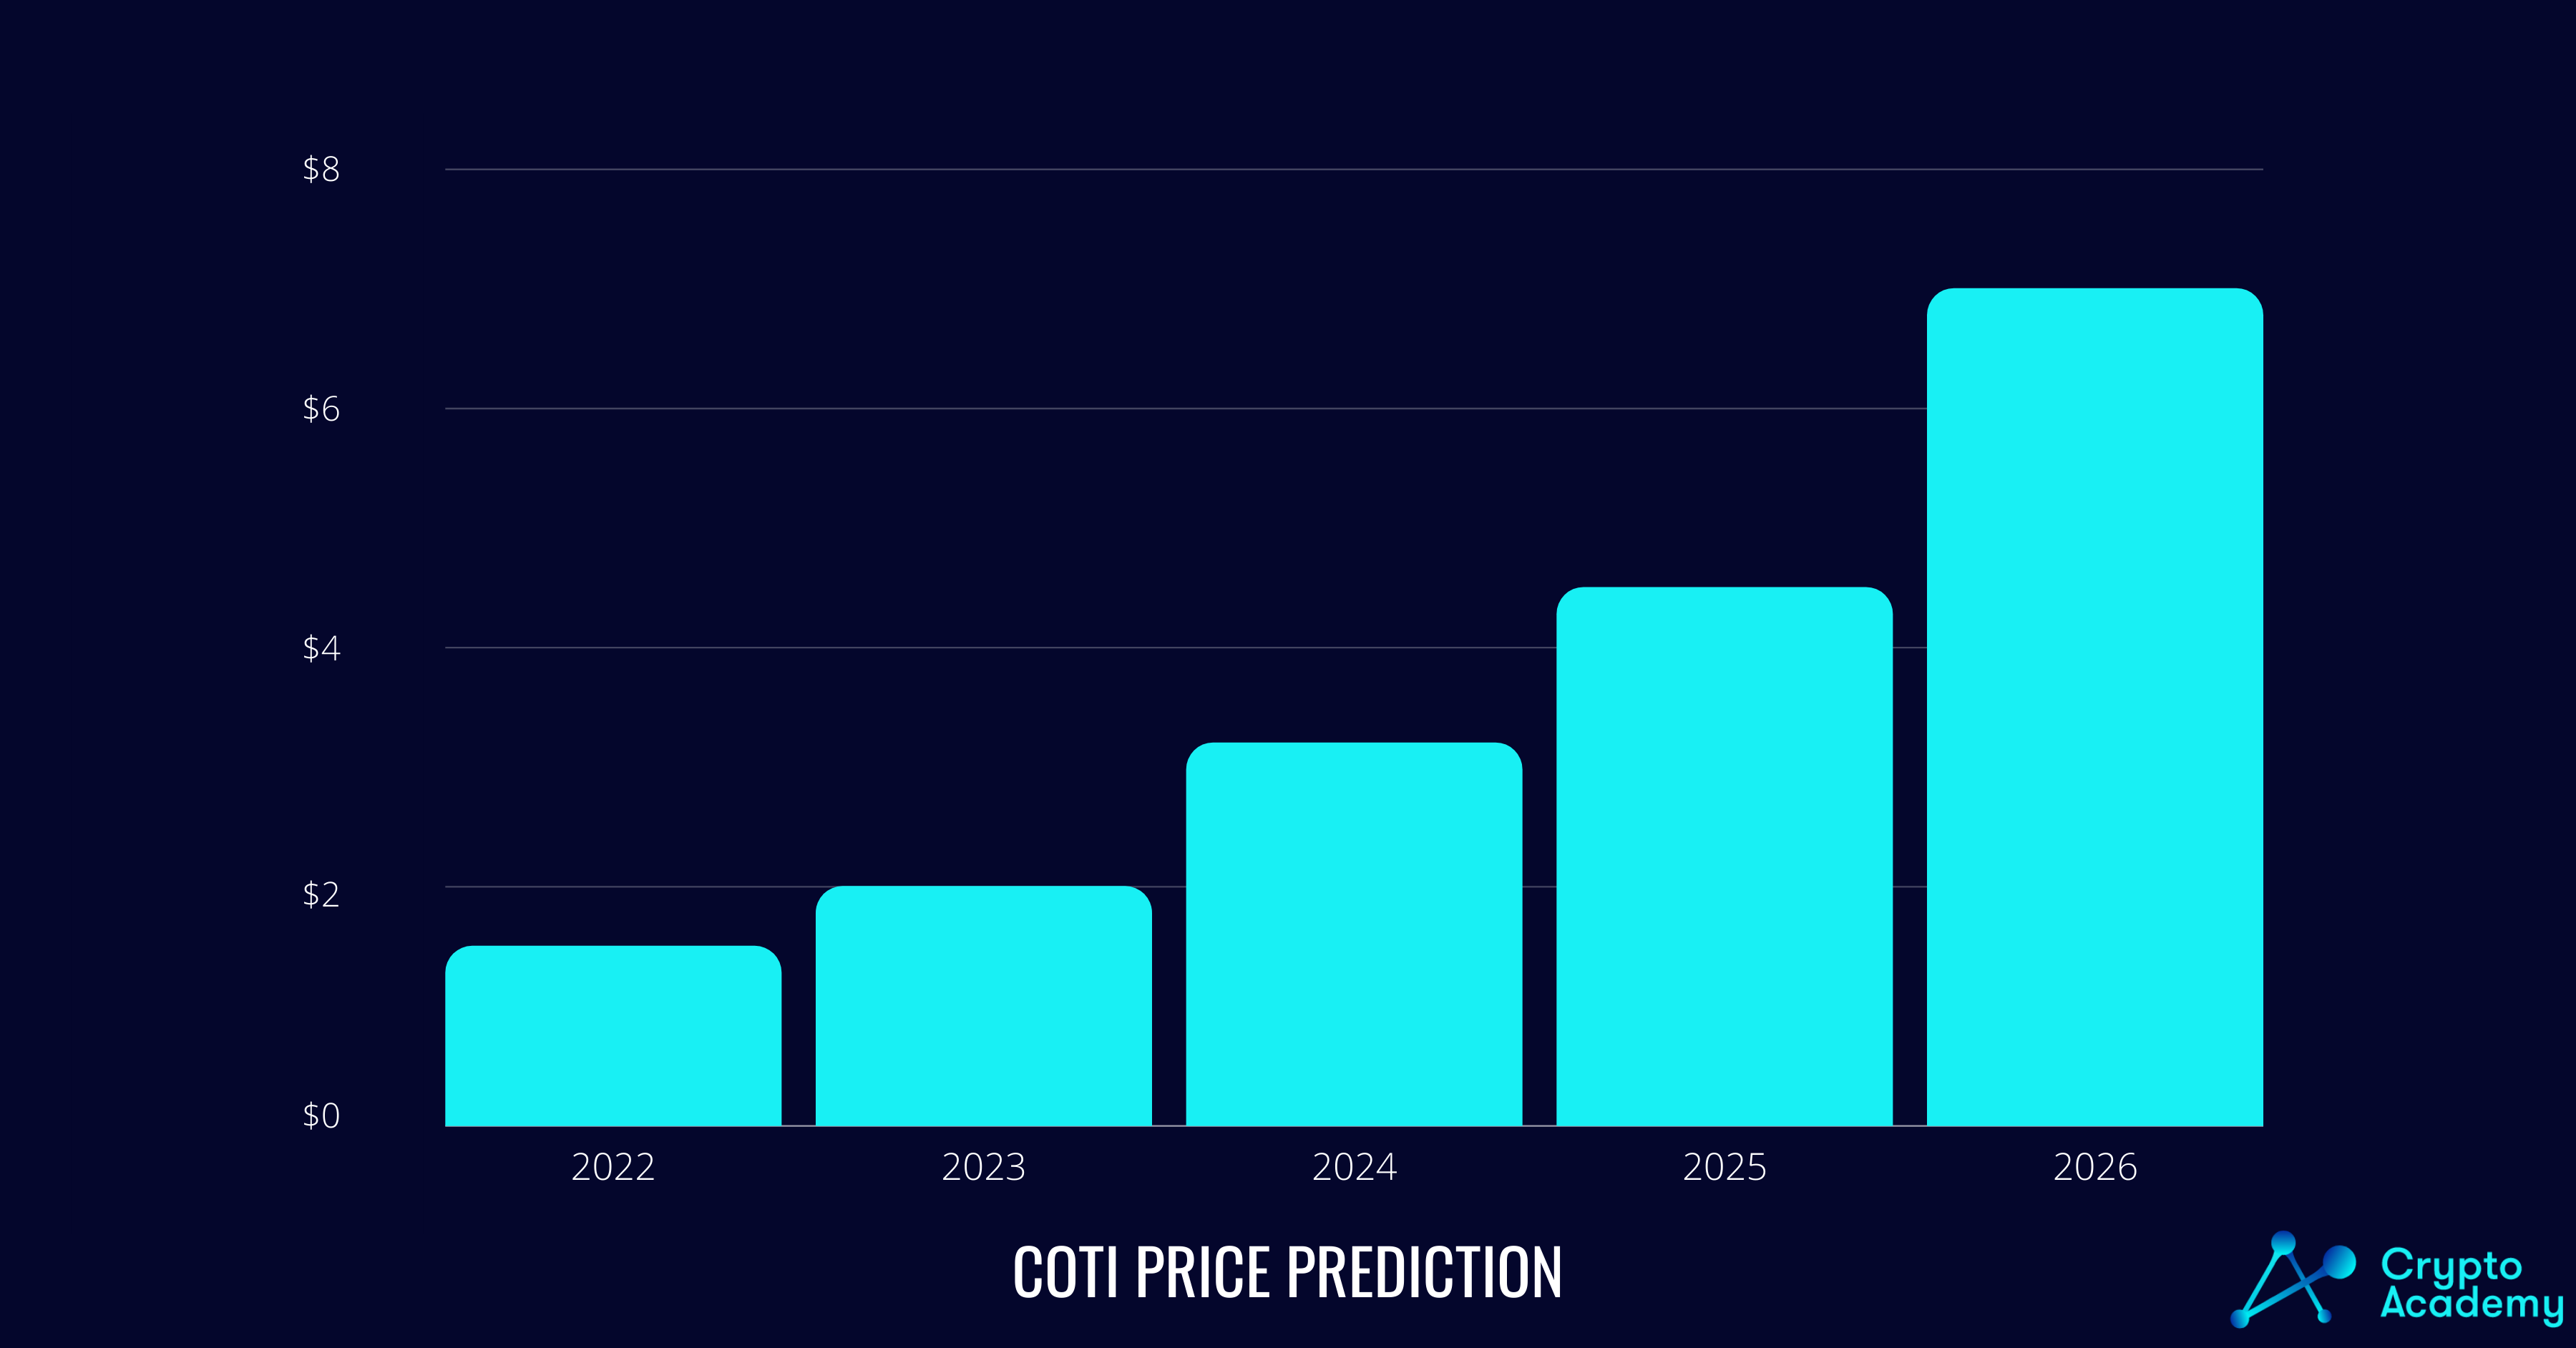 Coti (COTI) price prediction for the coming years